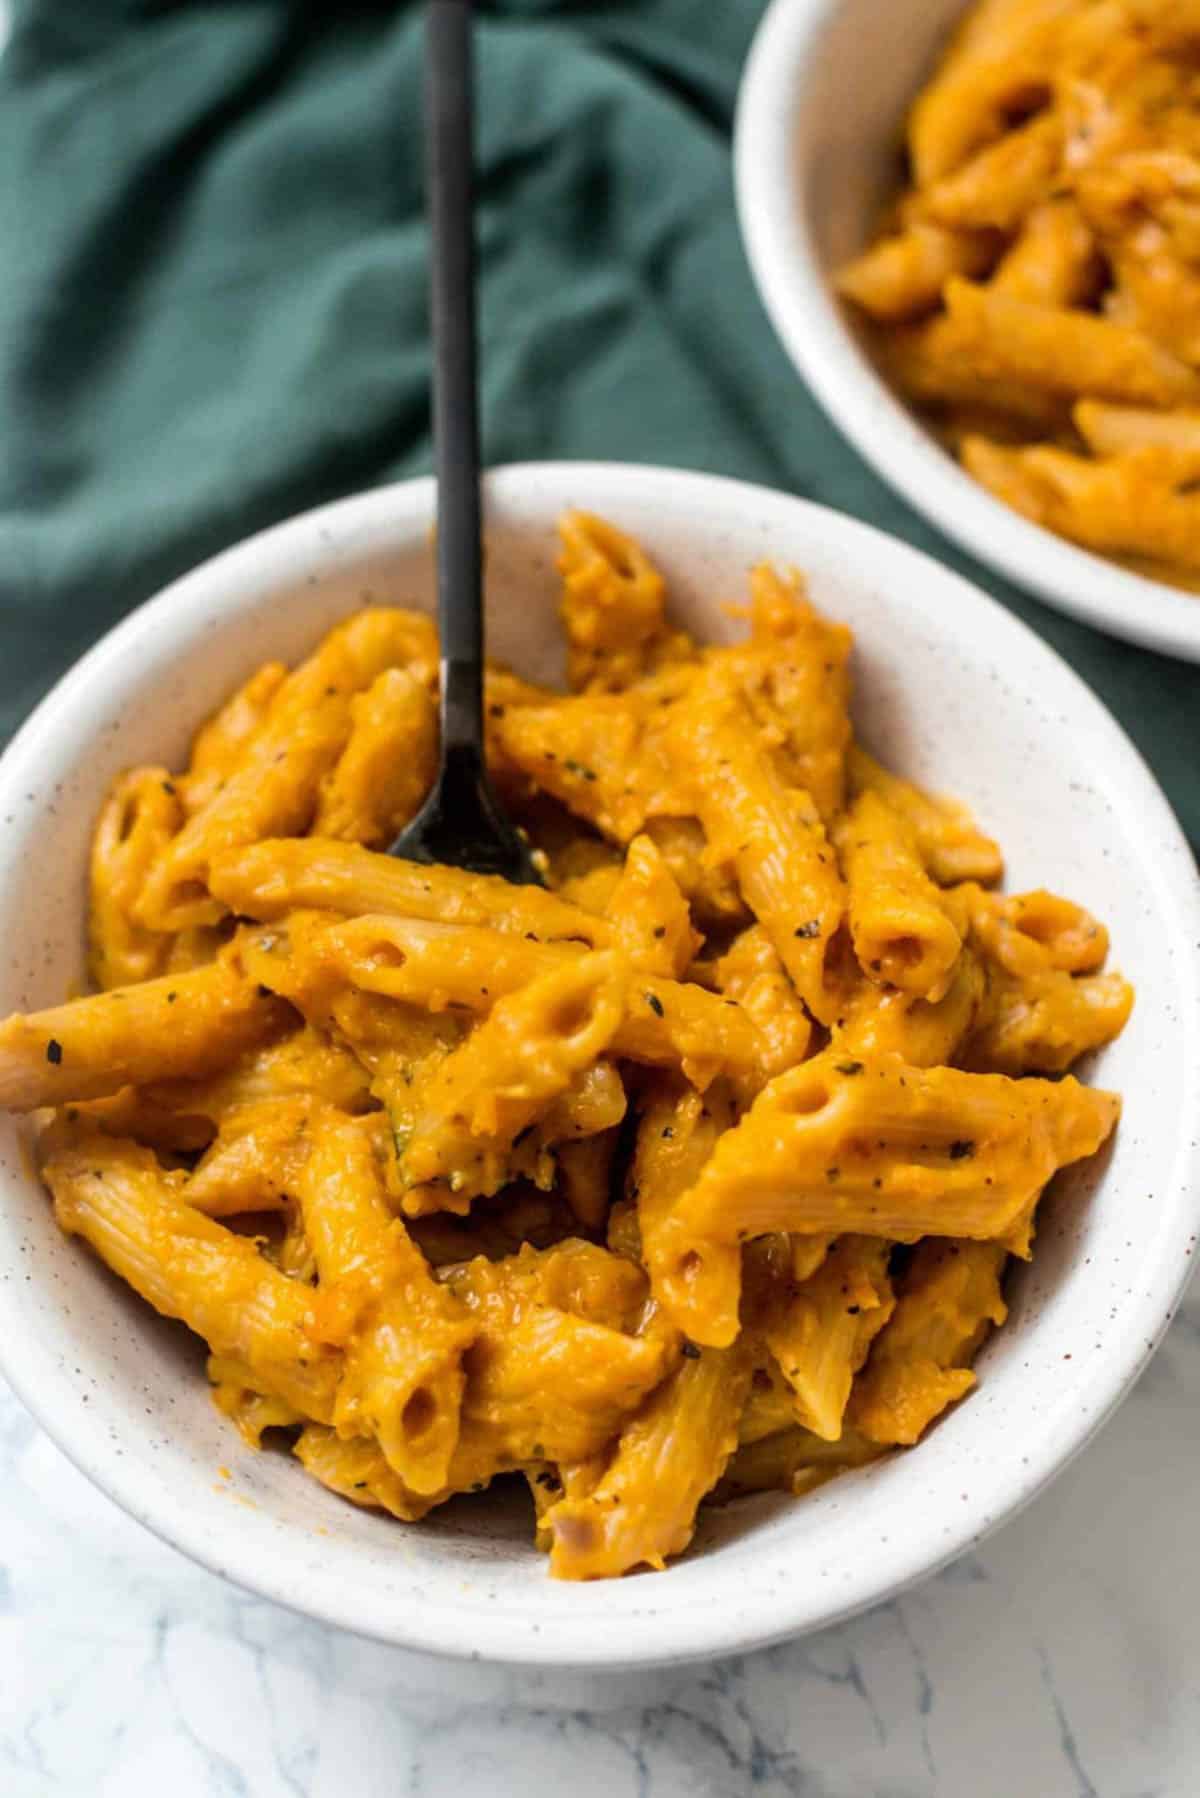 Pasta cooked in a butternut squash saucein a white bowl with a black fork